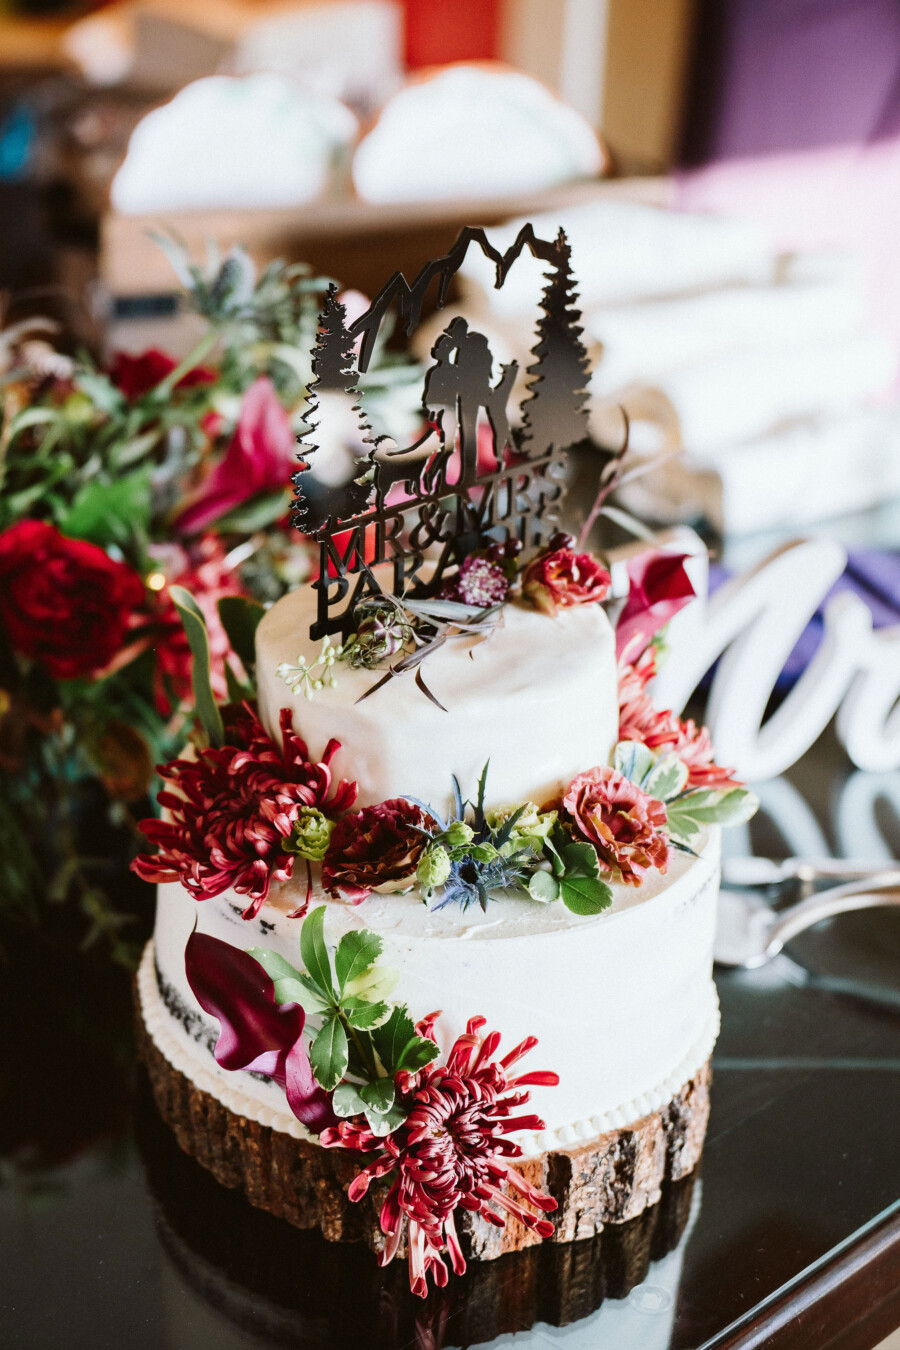 White wedding cake with bright flowers